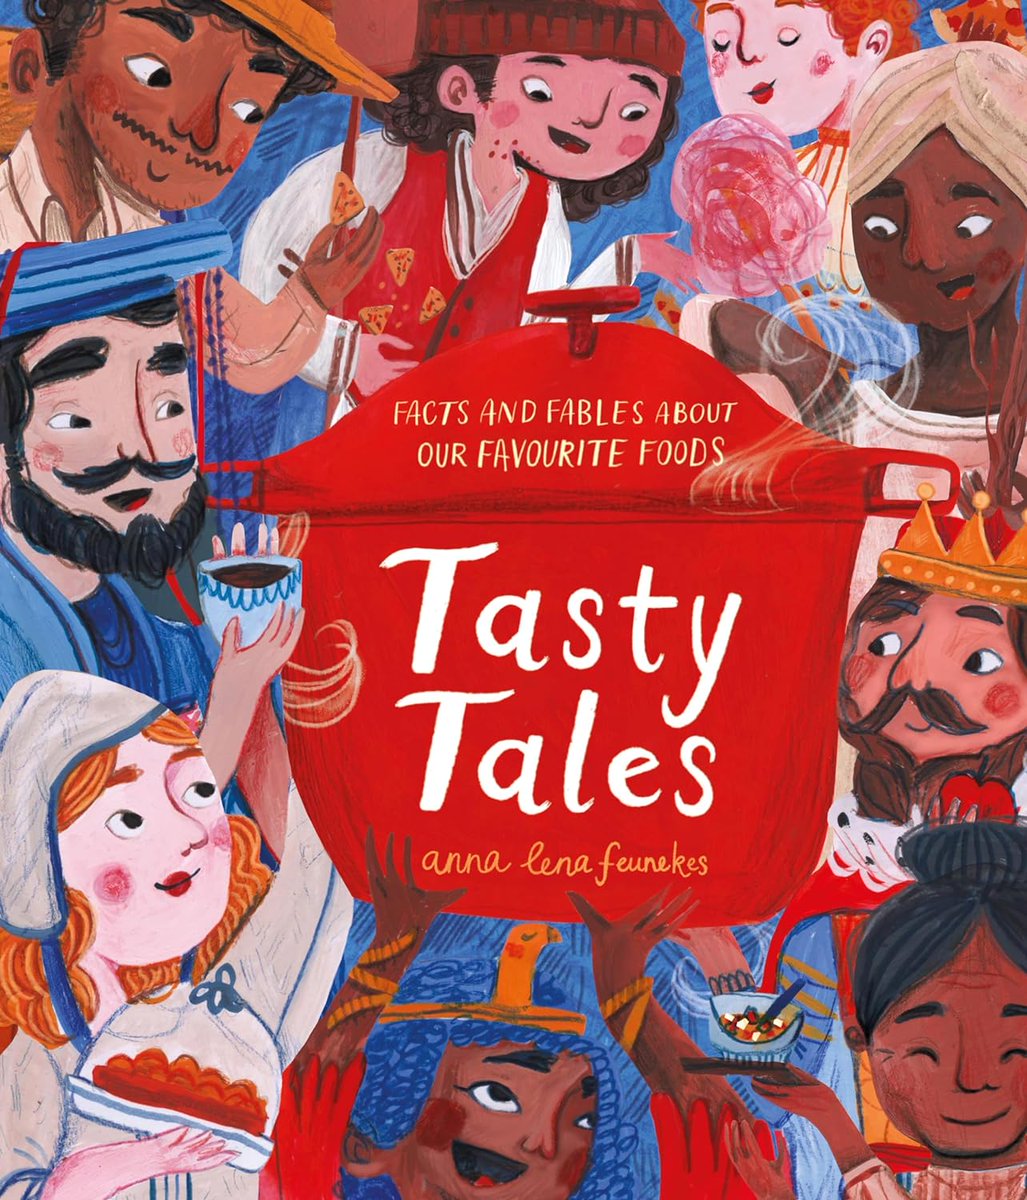 Who knew that history could make you hungry? Get your teeth into @AnnaLenavIersel’s #TastyTales a juicy book of fascinating food facts & fables @publishinguclan @antswilk pamnorfolkblog.blogspot.com Review also @leponline later this week!